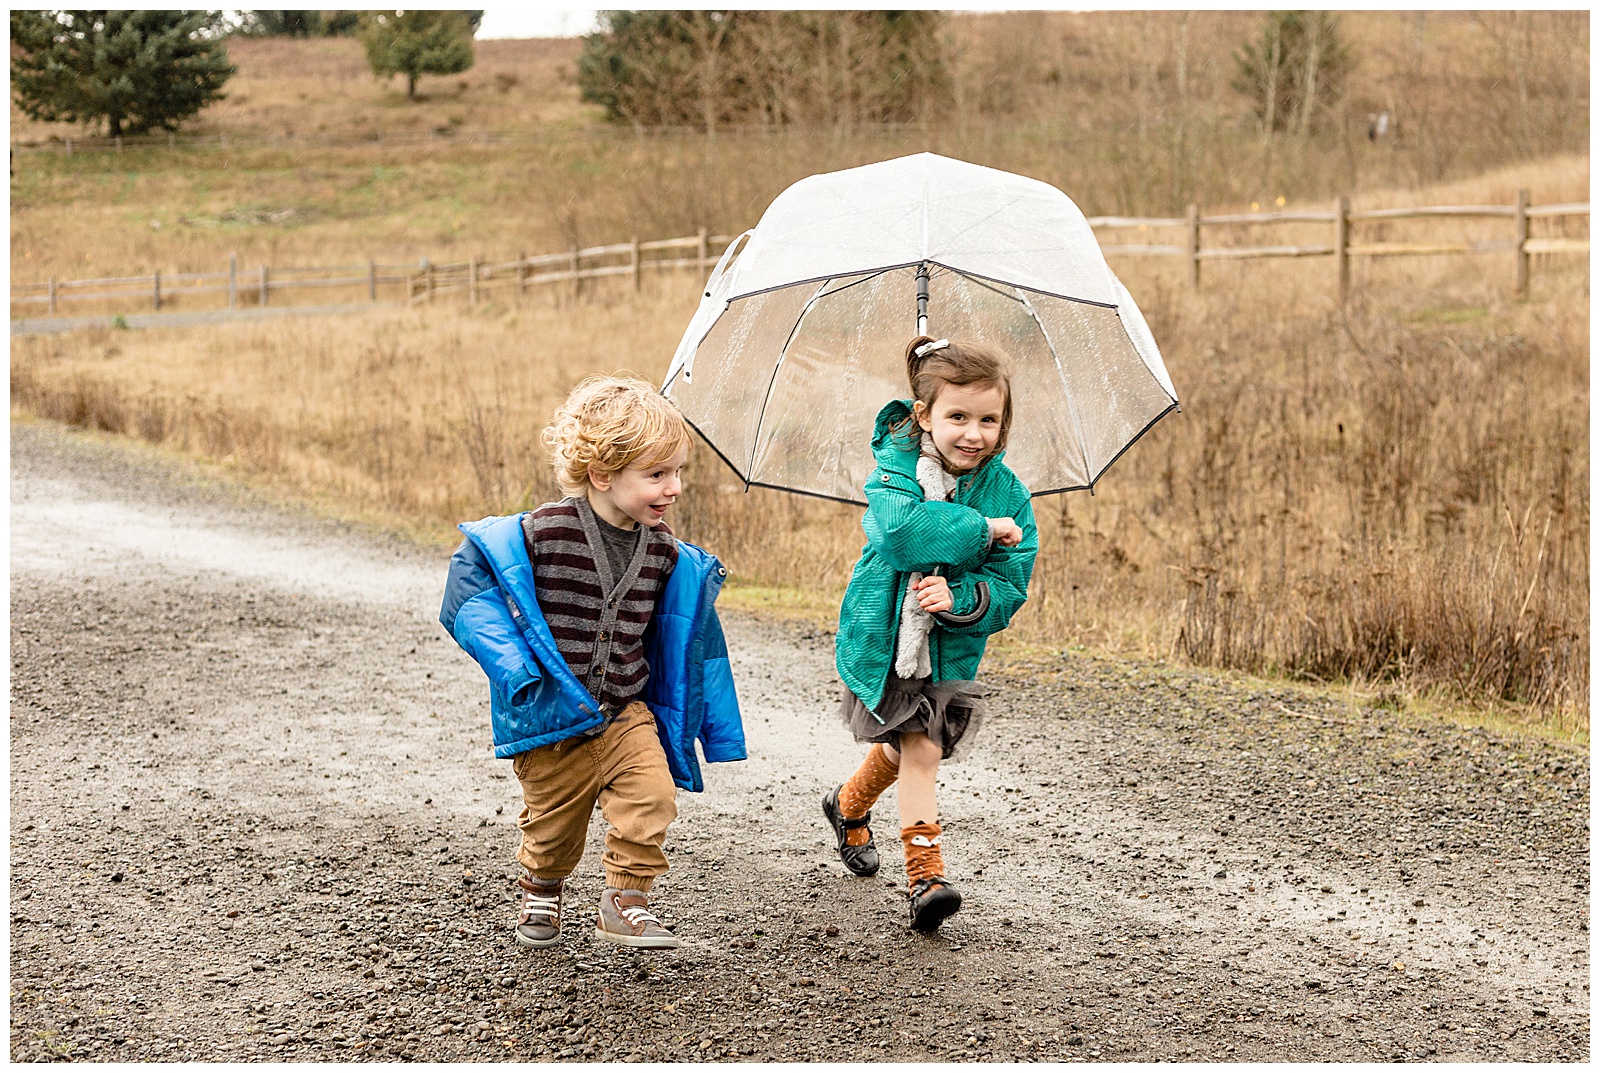 3 year old boy and 5 year old girl running with rain coats and clear umbrella